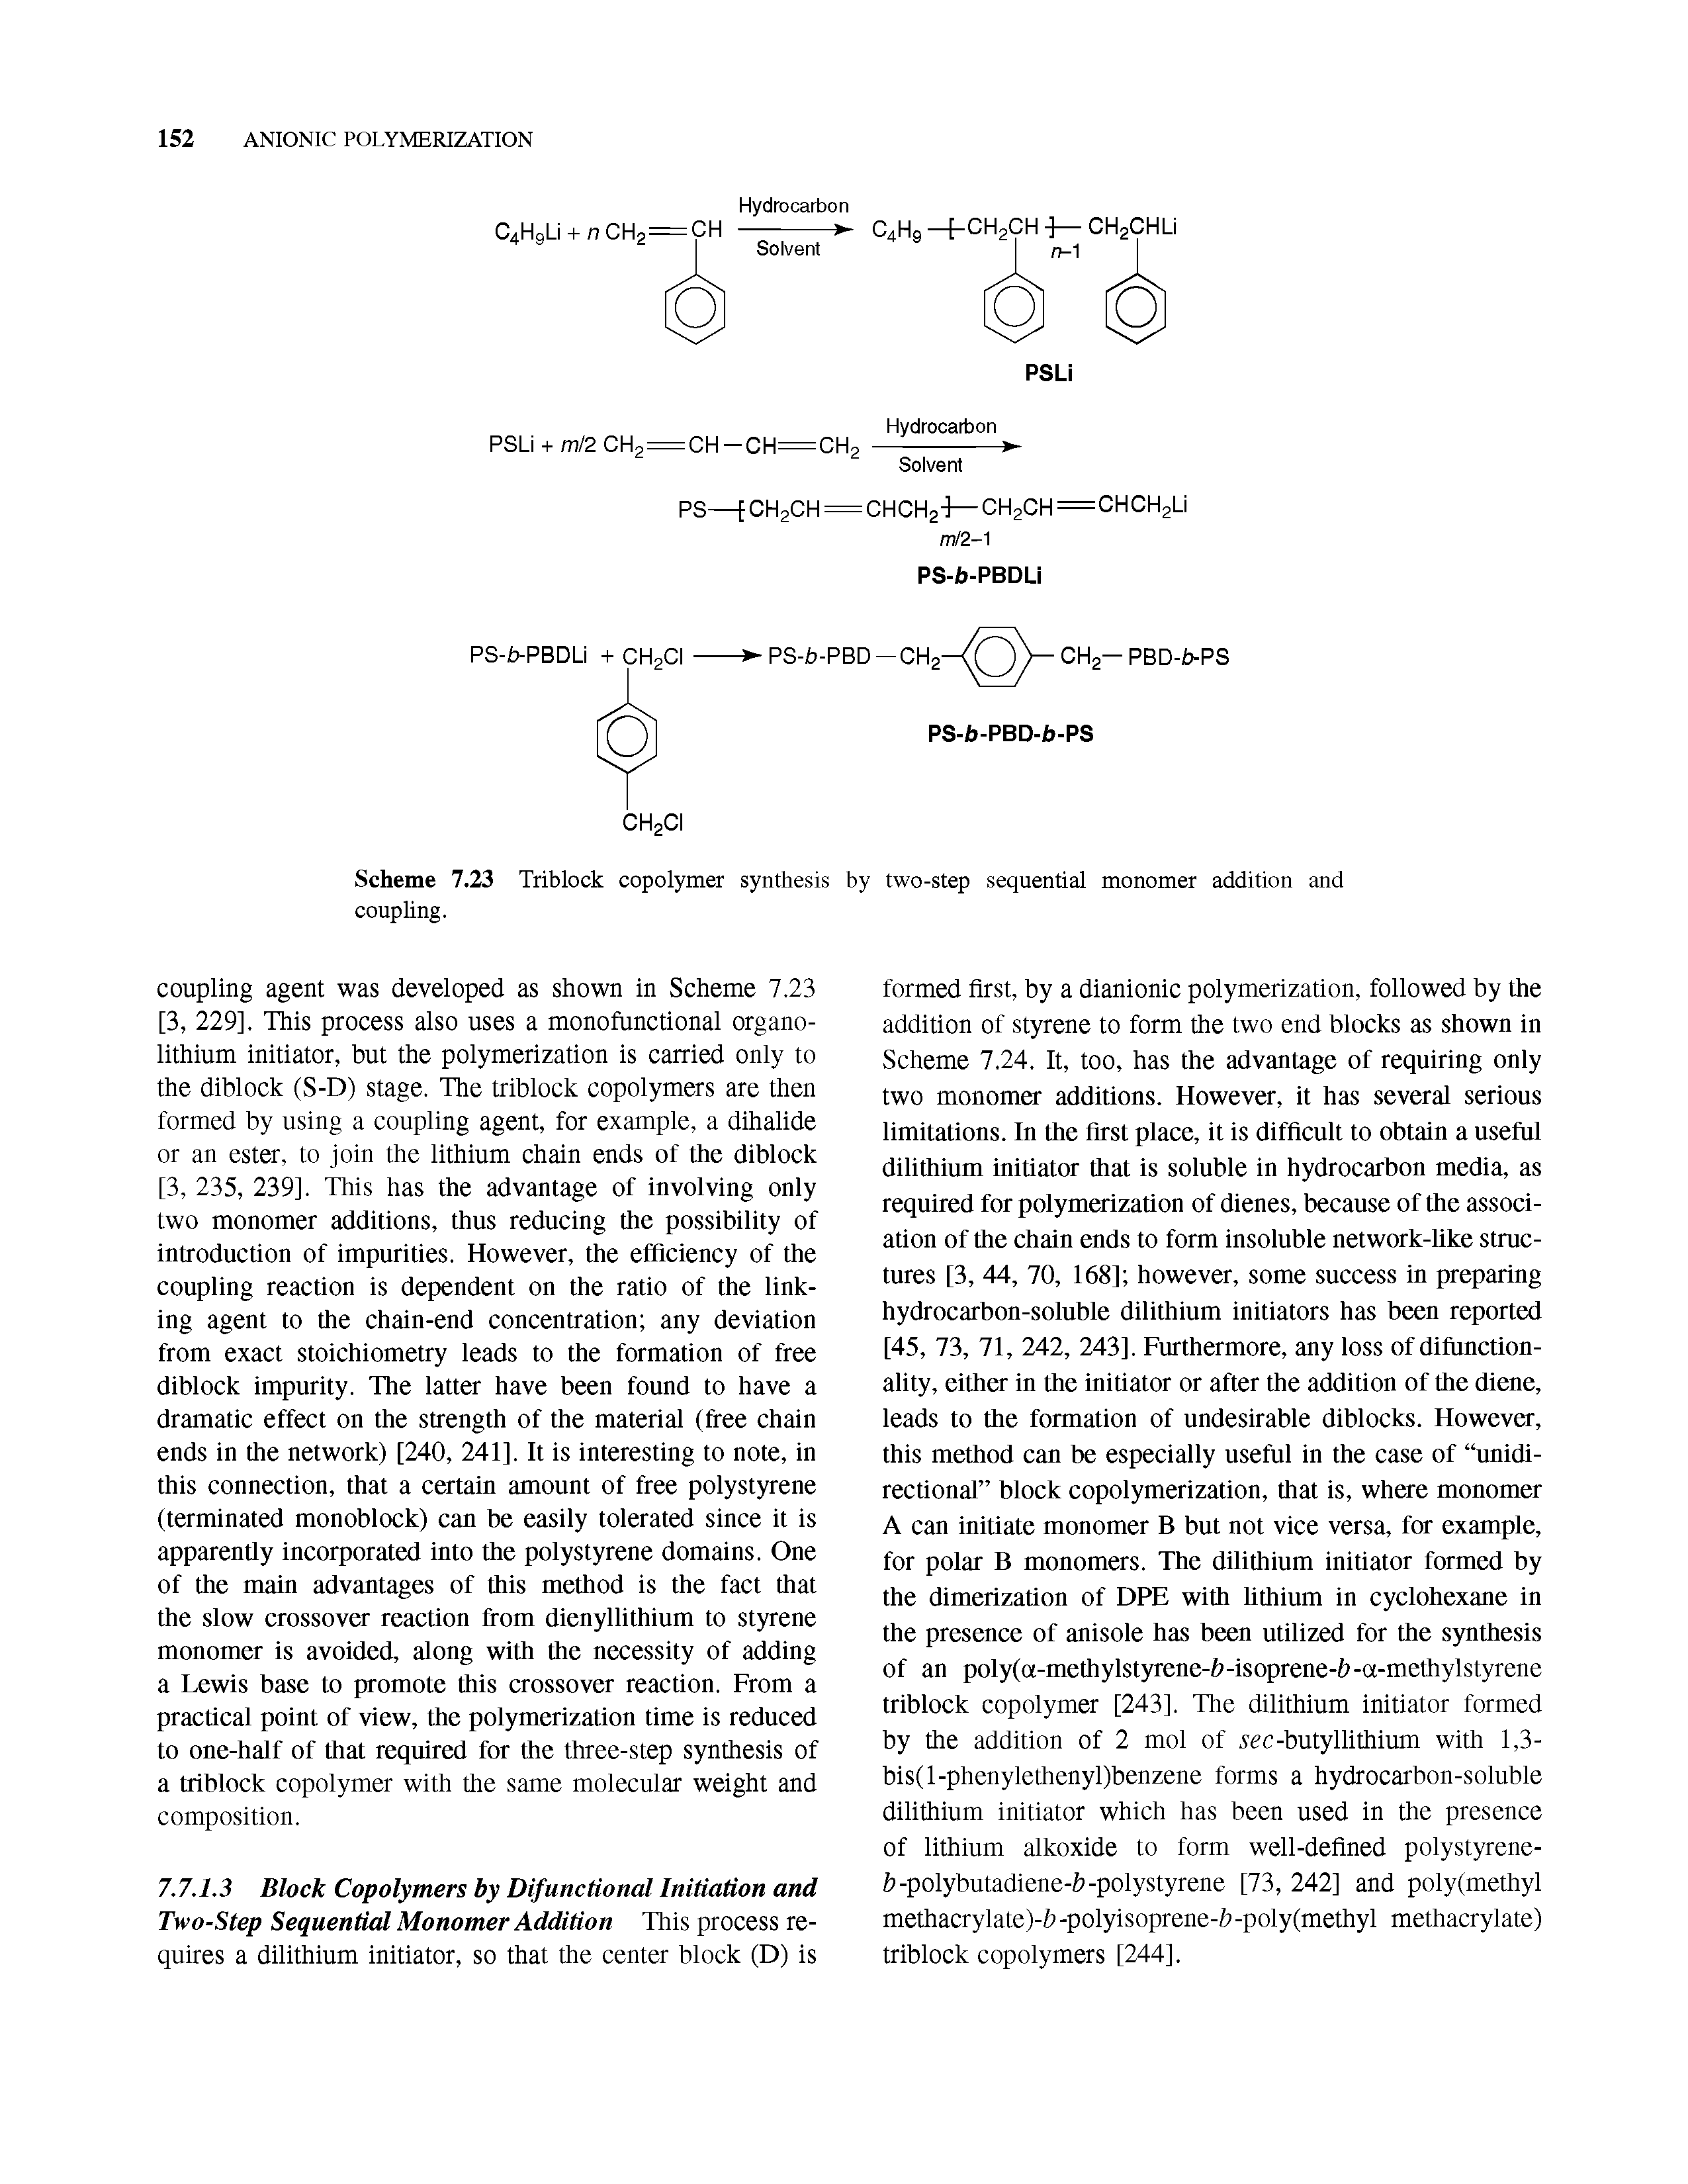 Scheme 7.23 Triblock copolymer synthesis by two-step sequential monomer addition and coupling.